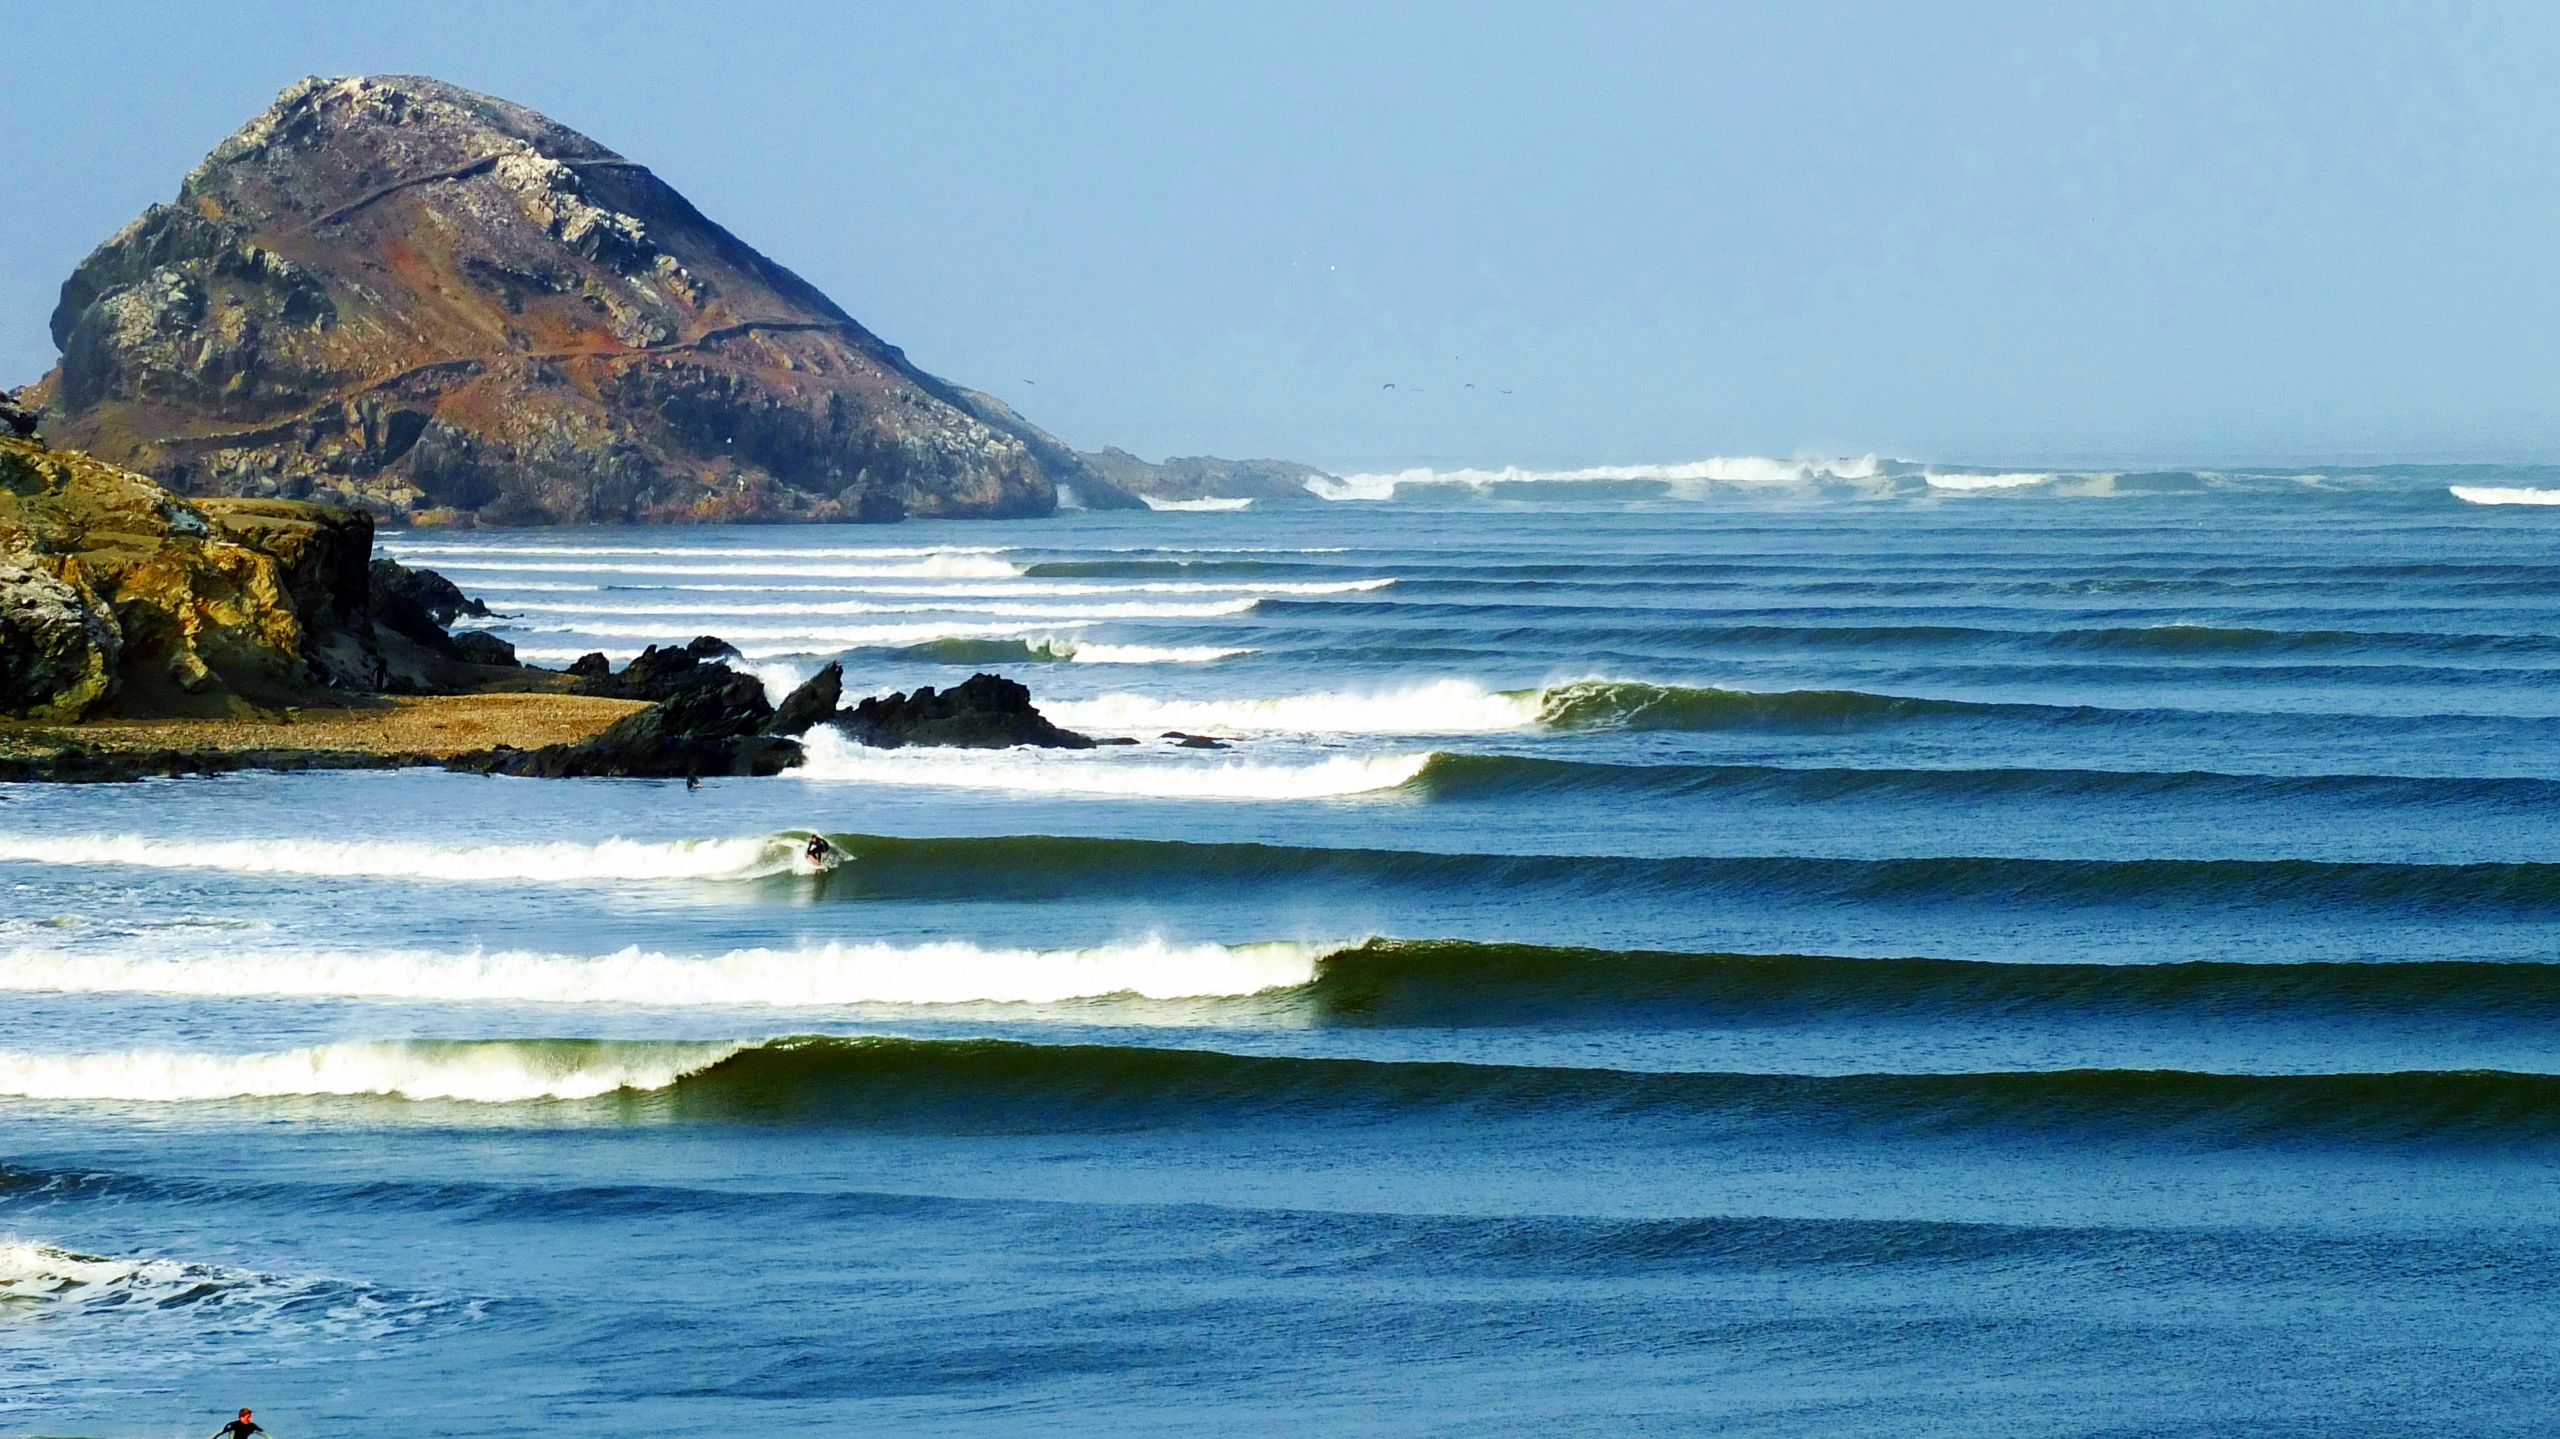 SUP Chicama – A guide to the longest wave in the world